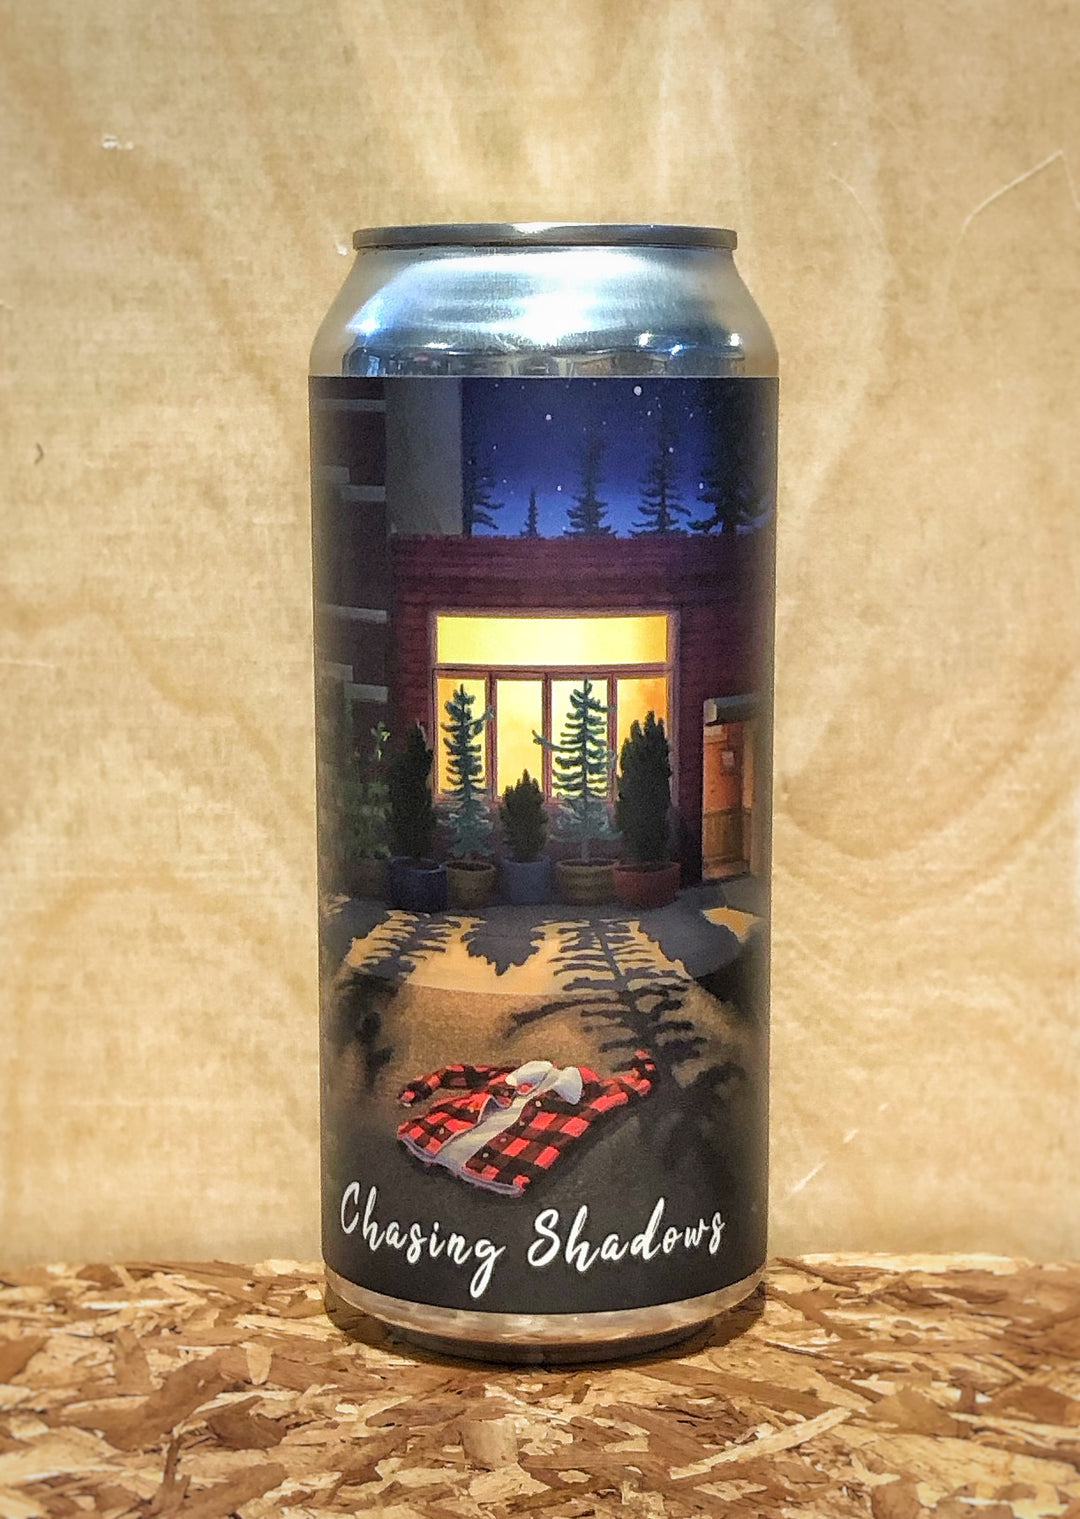 Timber Ales 'Chasing Shadows' Imperial Stout aged on Vanilla Beans and Cacao Nibs (North Haven, CT)